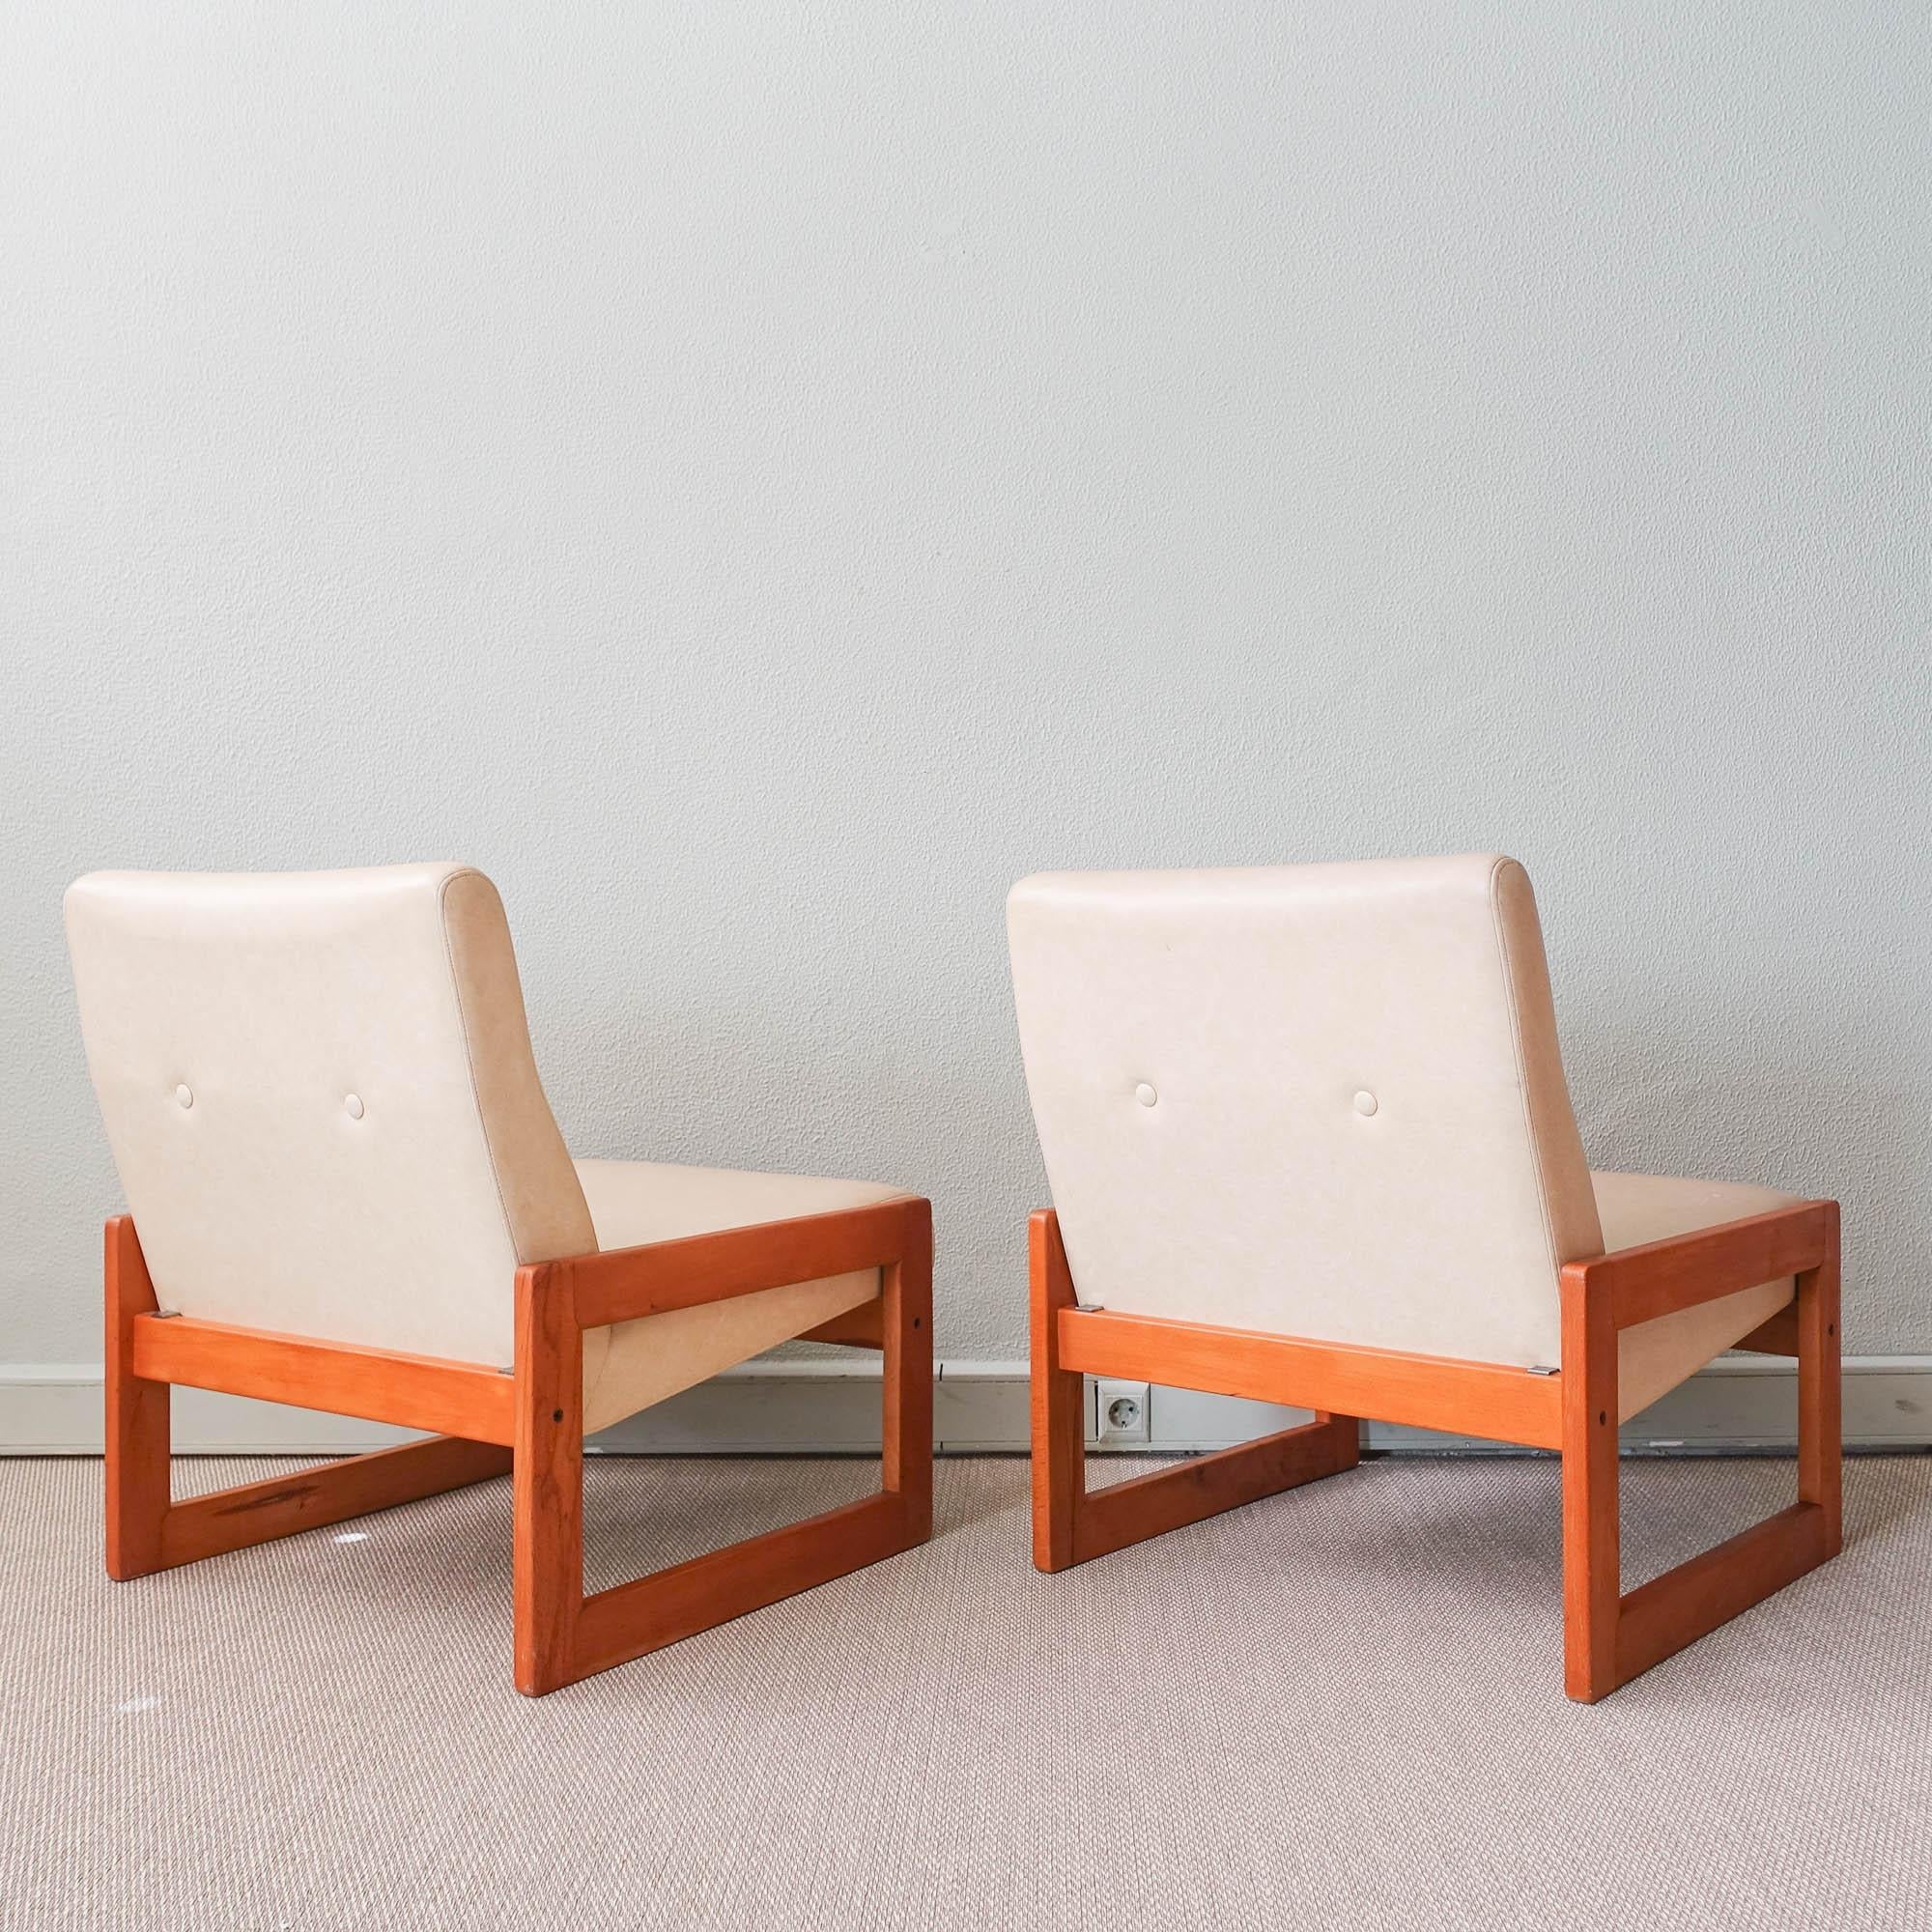 Late 20th Century Pair of Easy Chairs, Model Espinho, by José Espinho for Olaio, 1973 For Sale